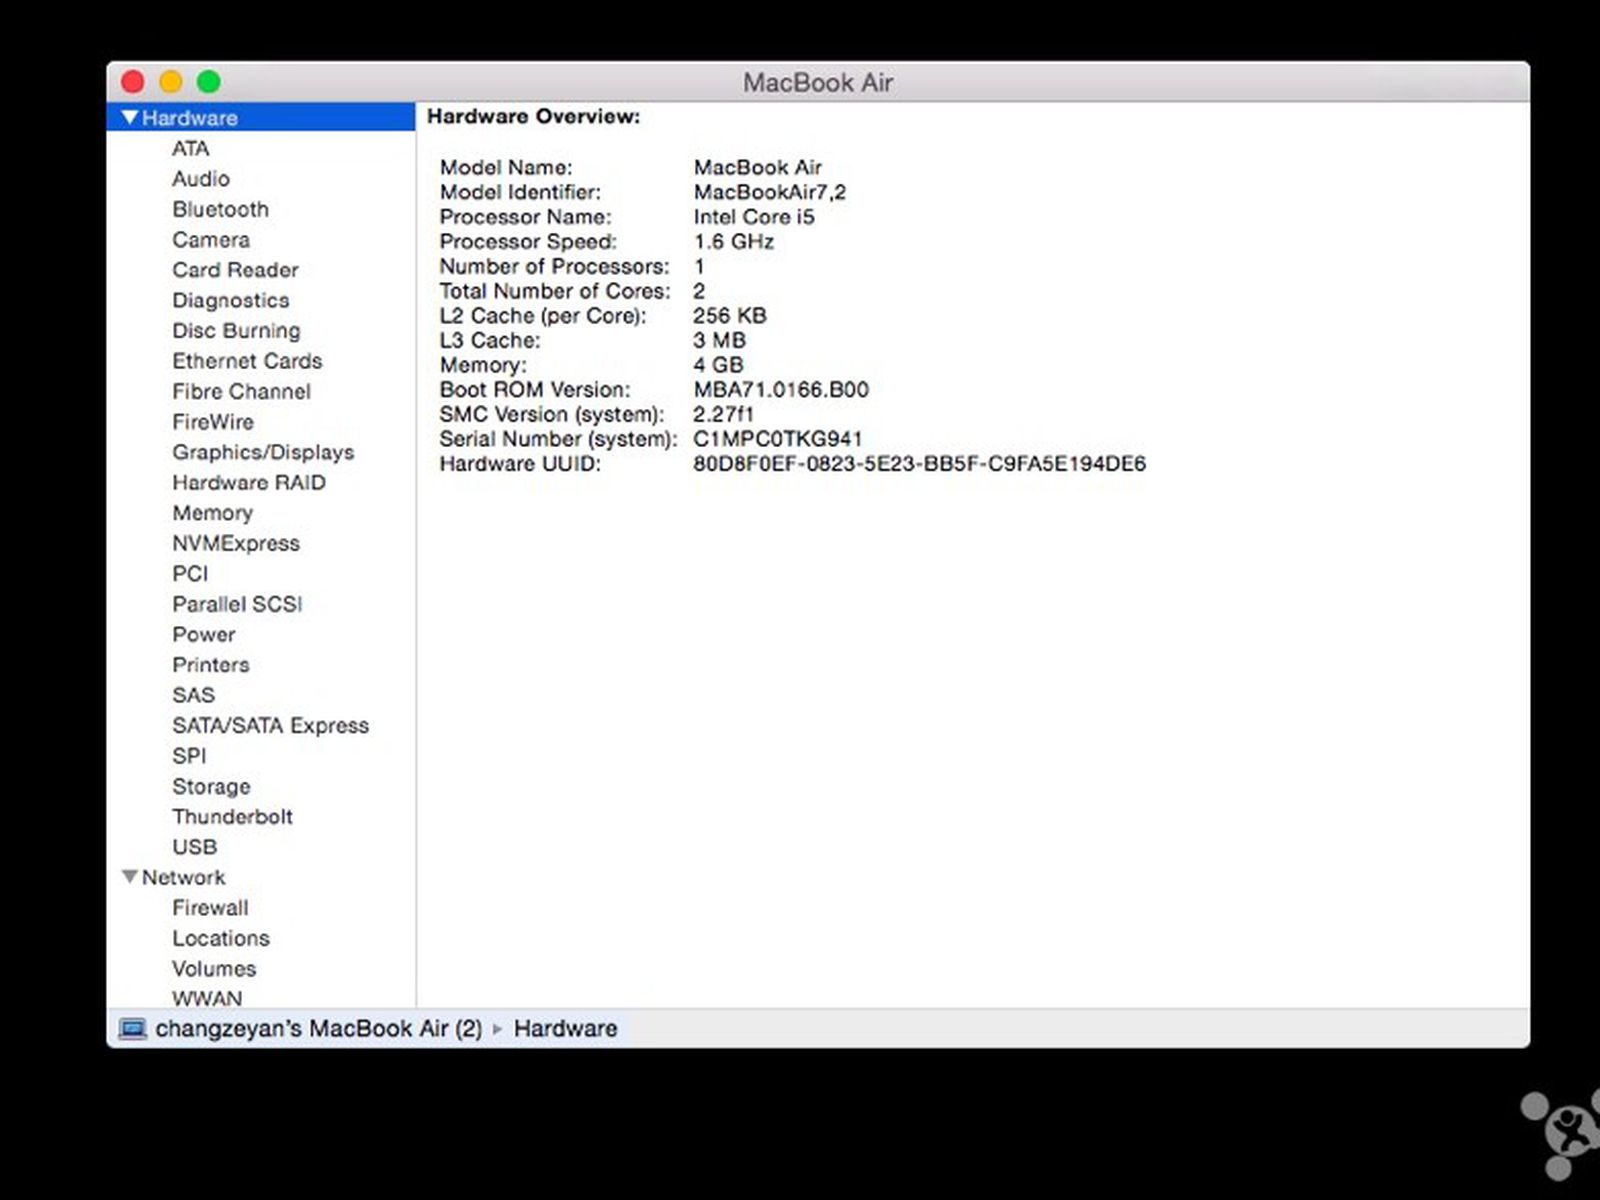 MacBook Air Refresh With Broadwell Processors and Intel HD 6000